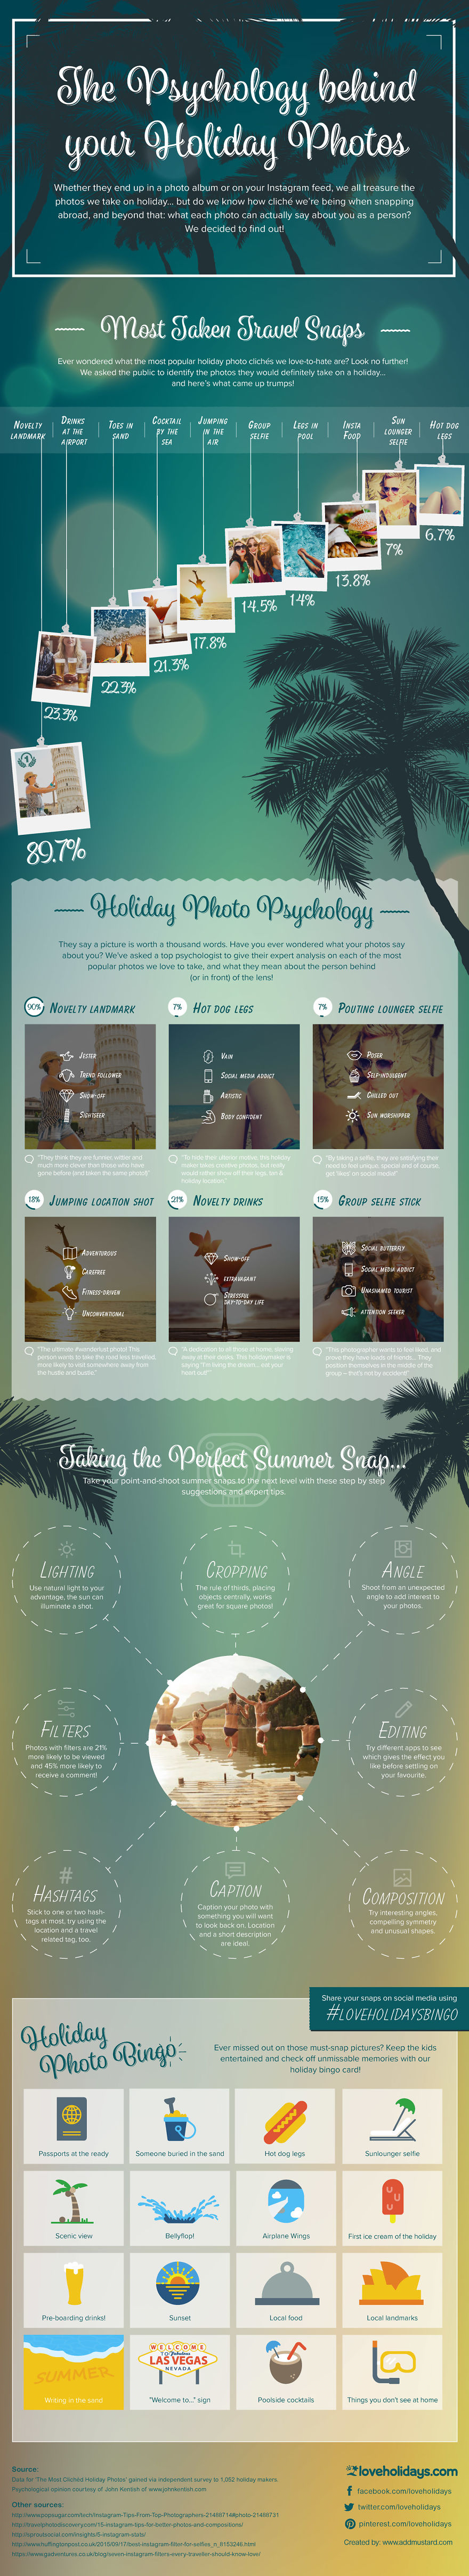 We Found Out The Psychology Behind The Most Popular Vacation Photos!